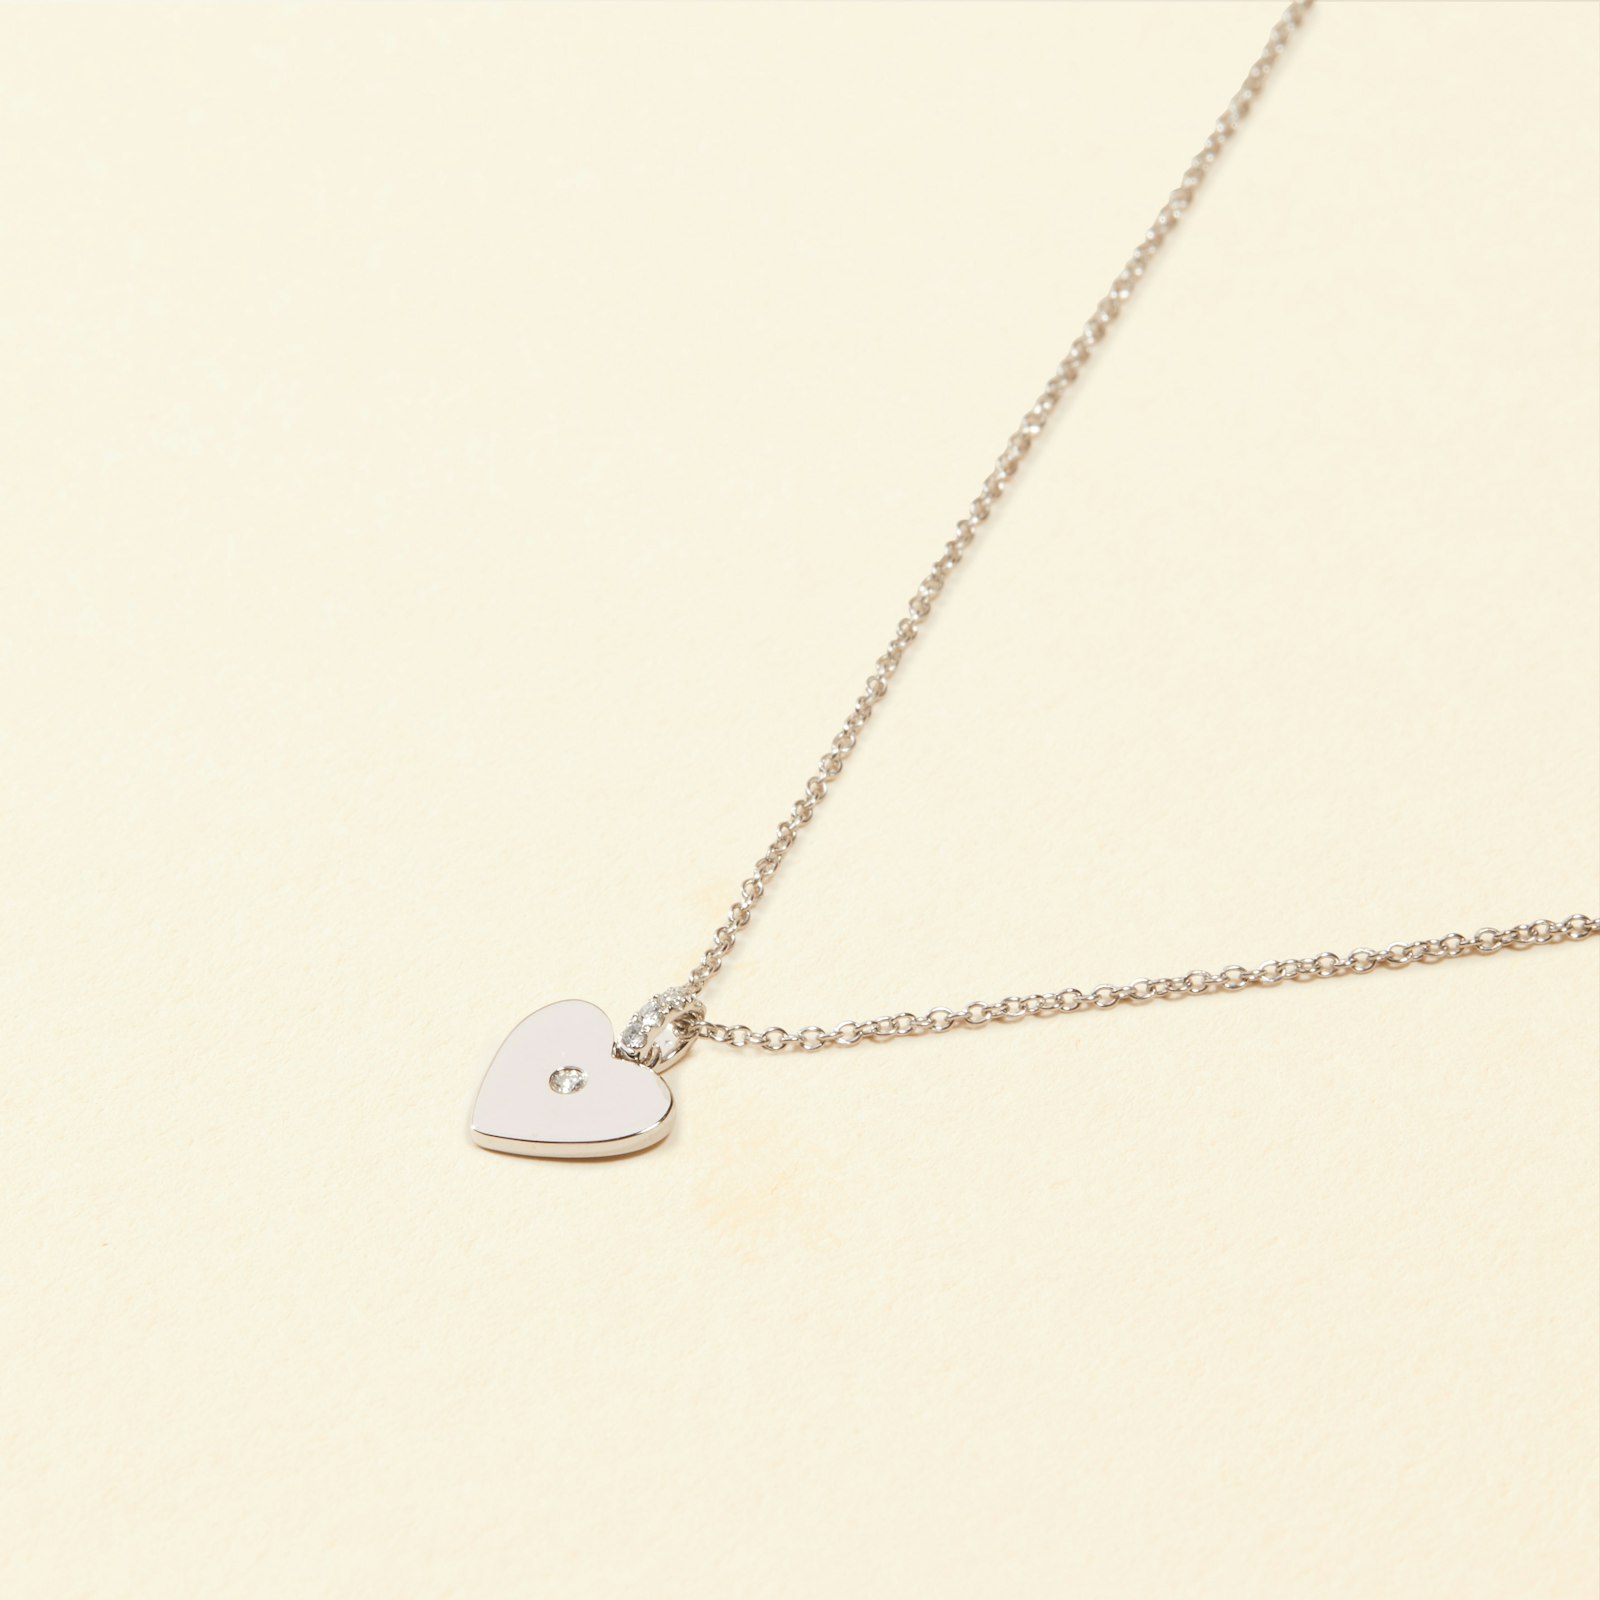 Adore Diamond Heart Necklace_White Gold_Jewelry_Product_1x1_0174.jpg